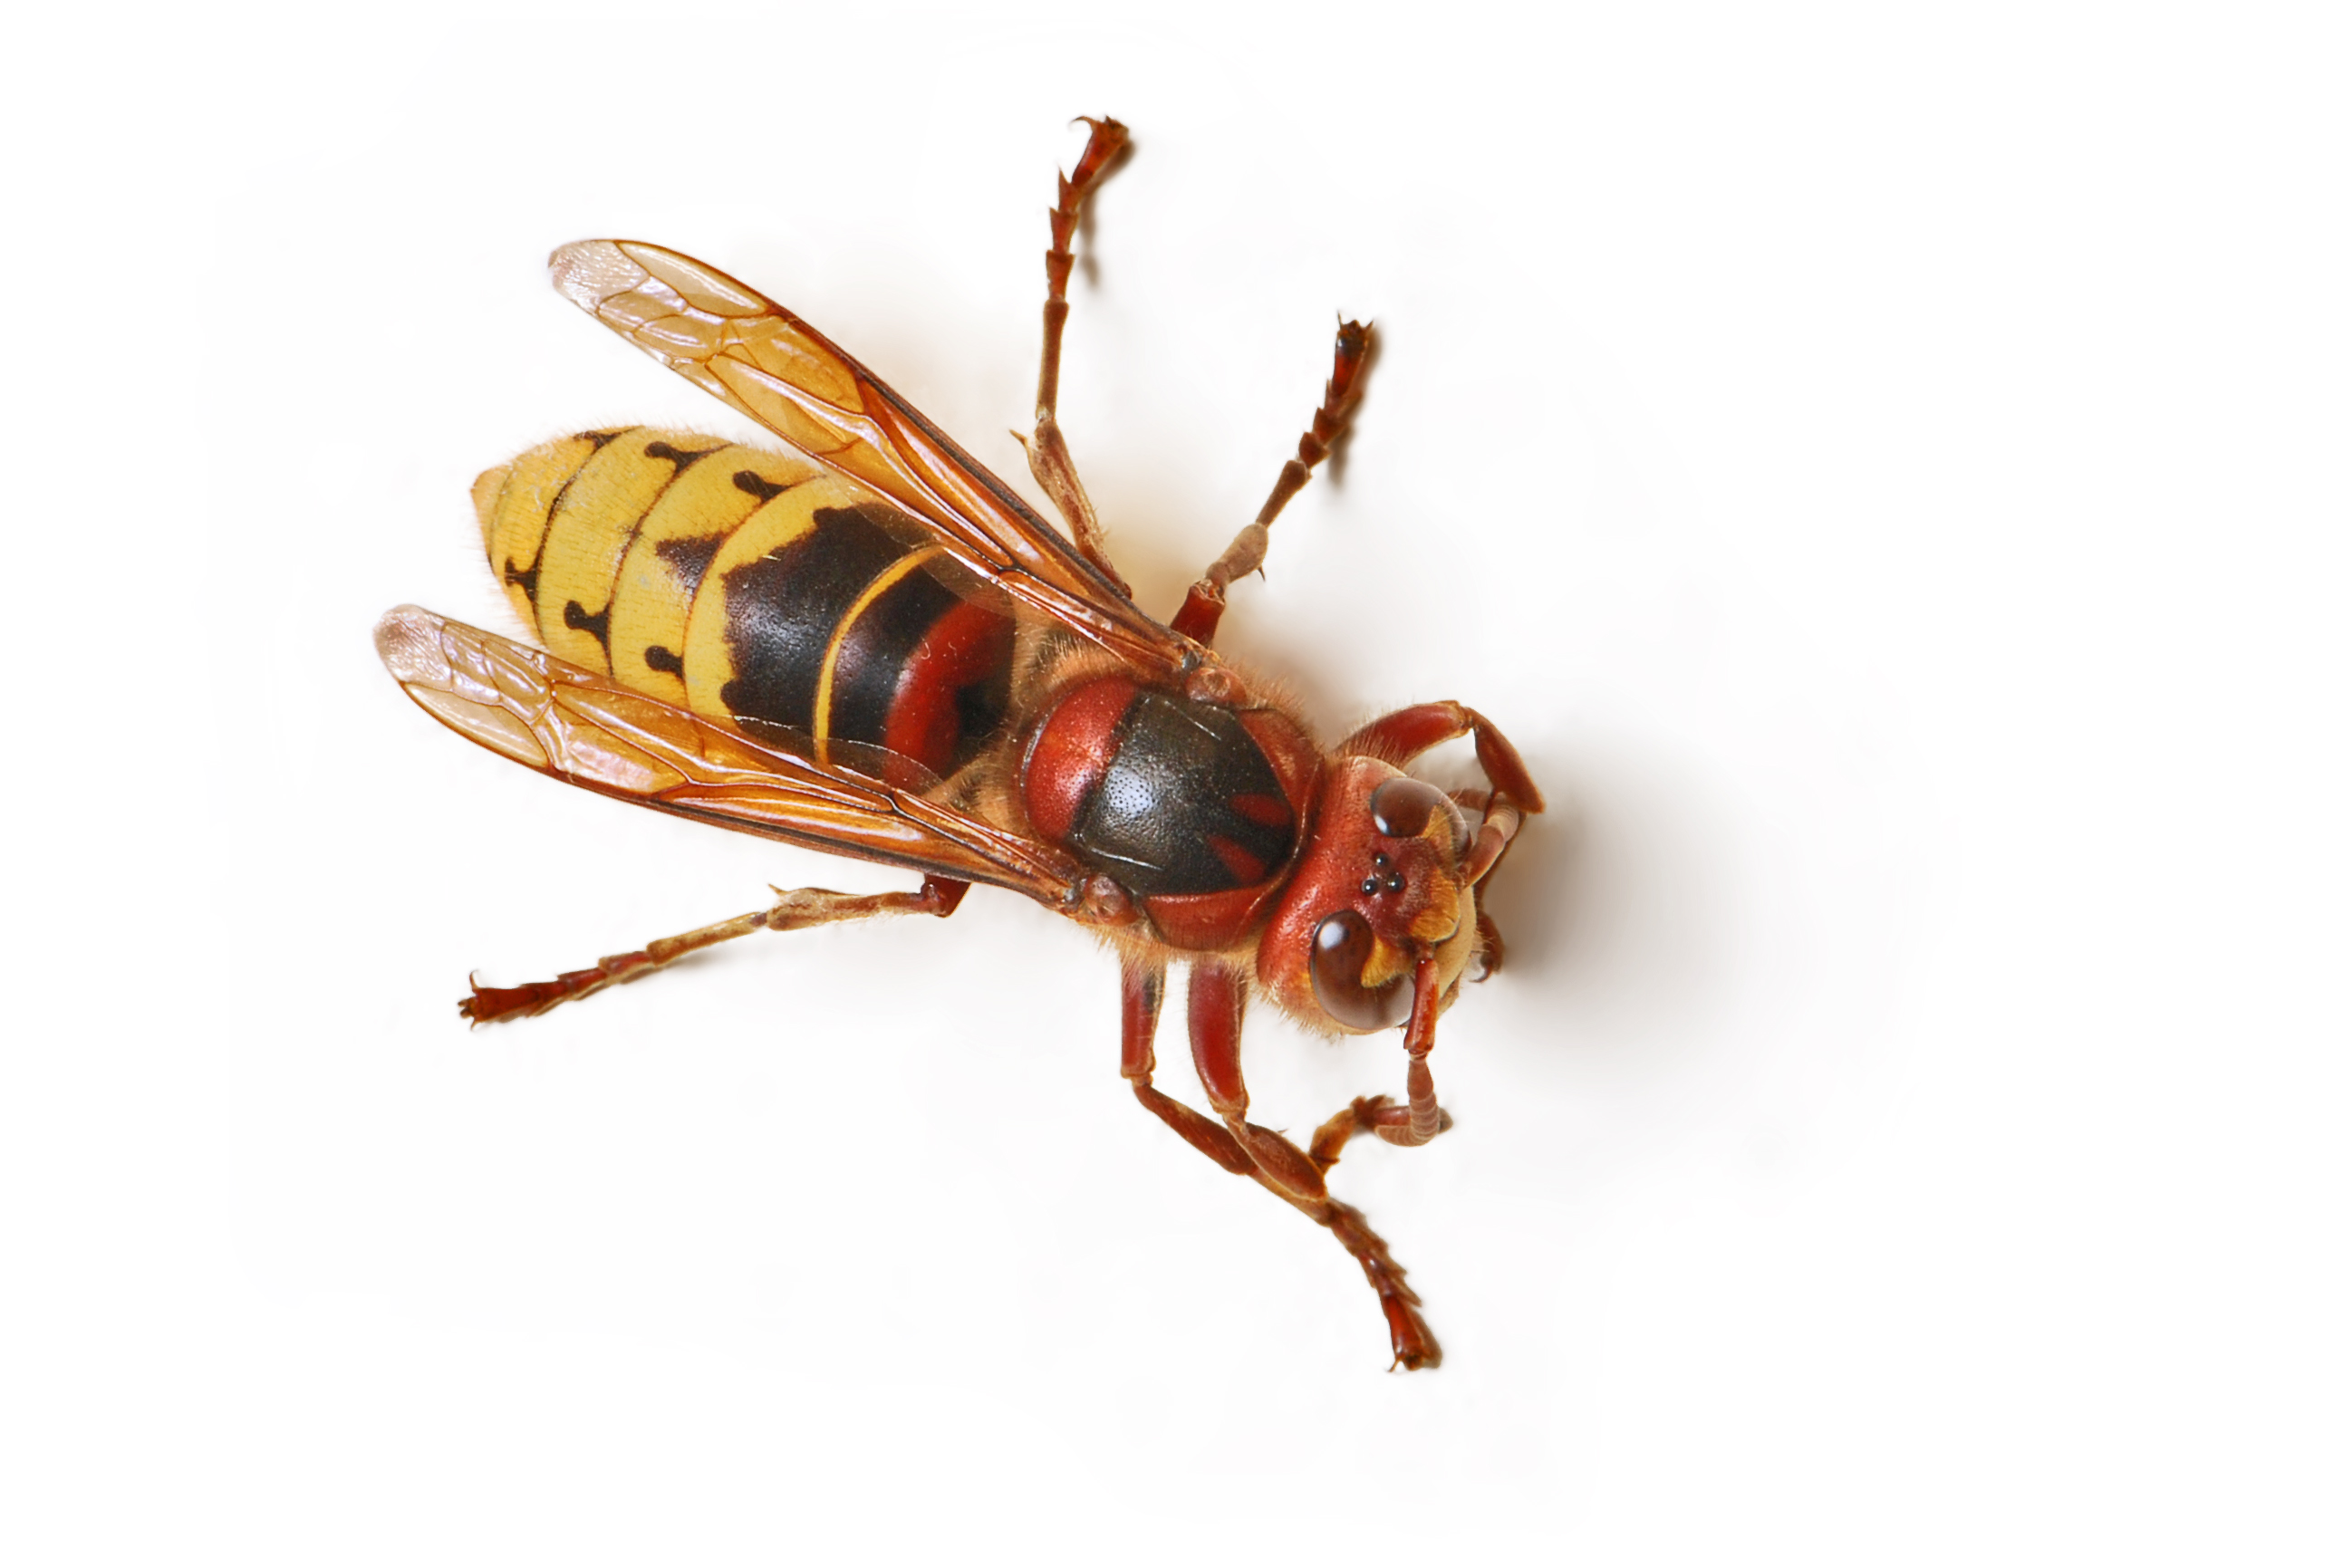 Giant Hornet Facts & Control: Get Rid of Giant Hornets